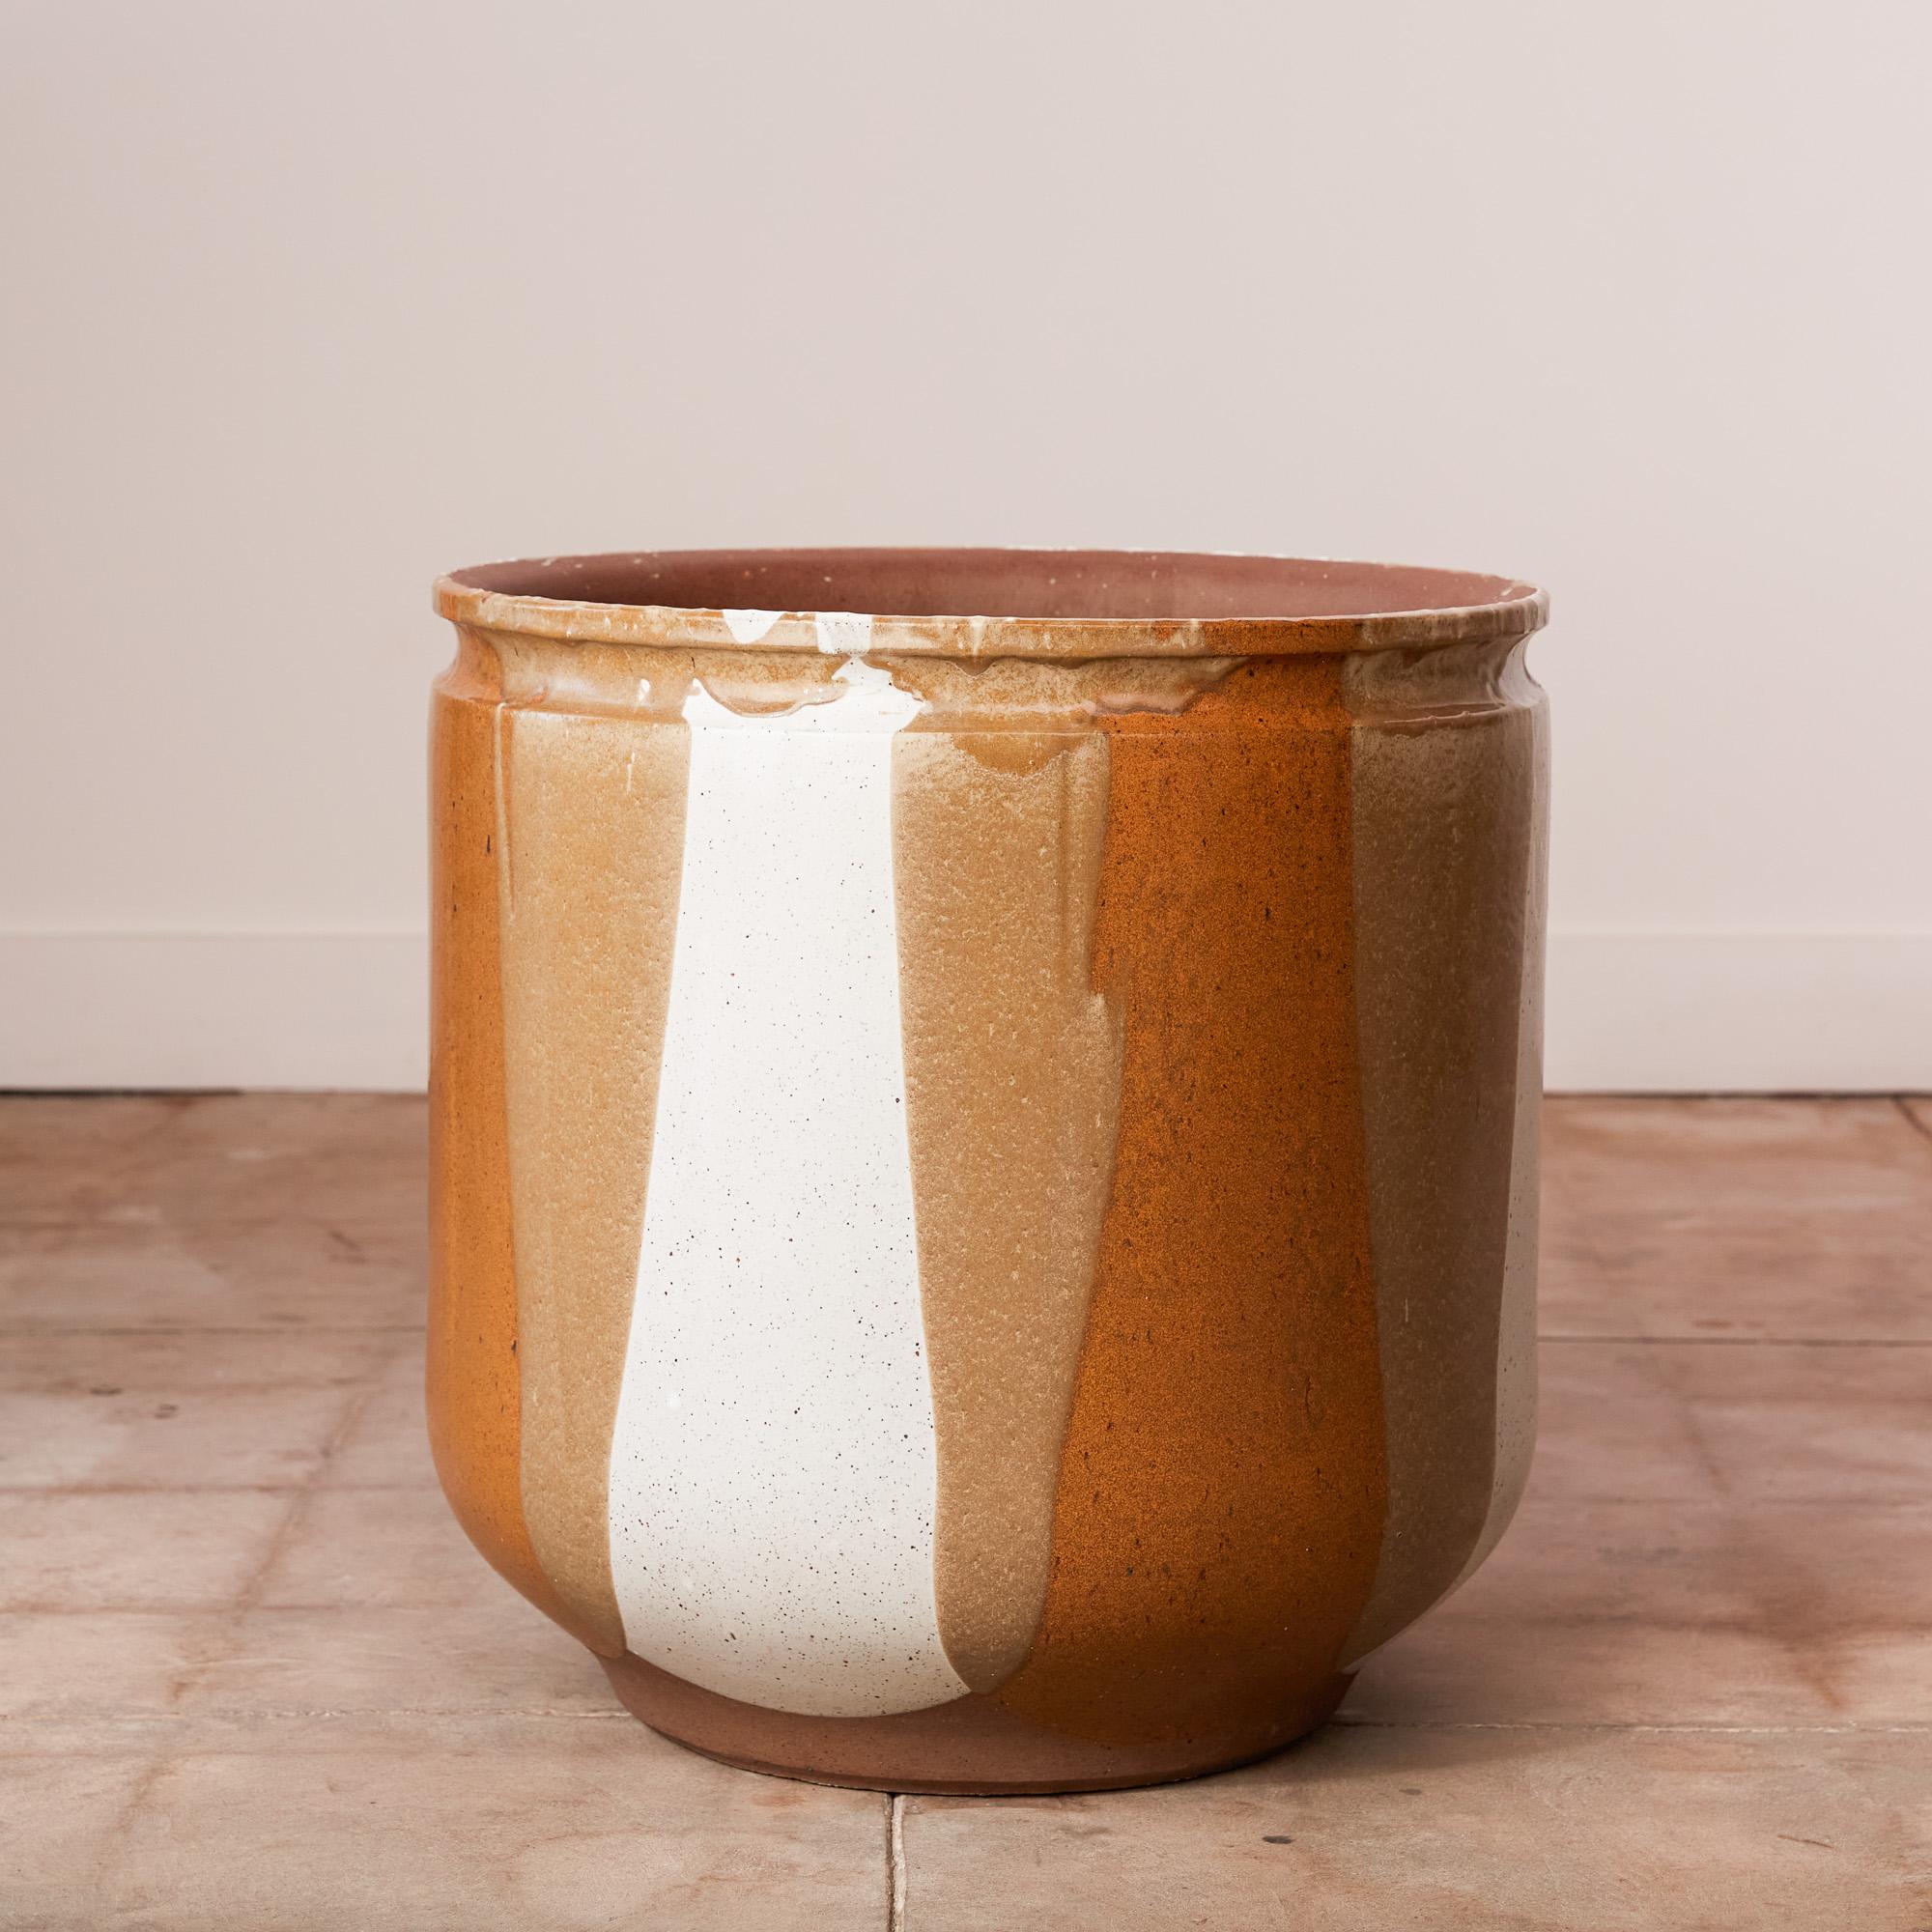 A tulip-shaped planter by David Cressey for the Pro/Artisan collection by Architectural Pottery with Cressey’s signature “Flame Glaze.” This planter has a rounded bottom with a flat foot and rounded lip at the opening, a simple shape rendered